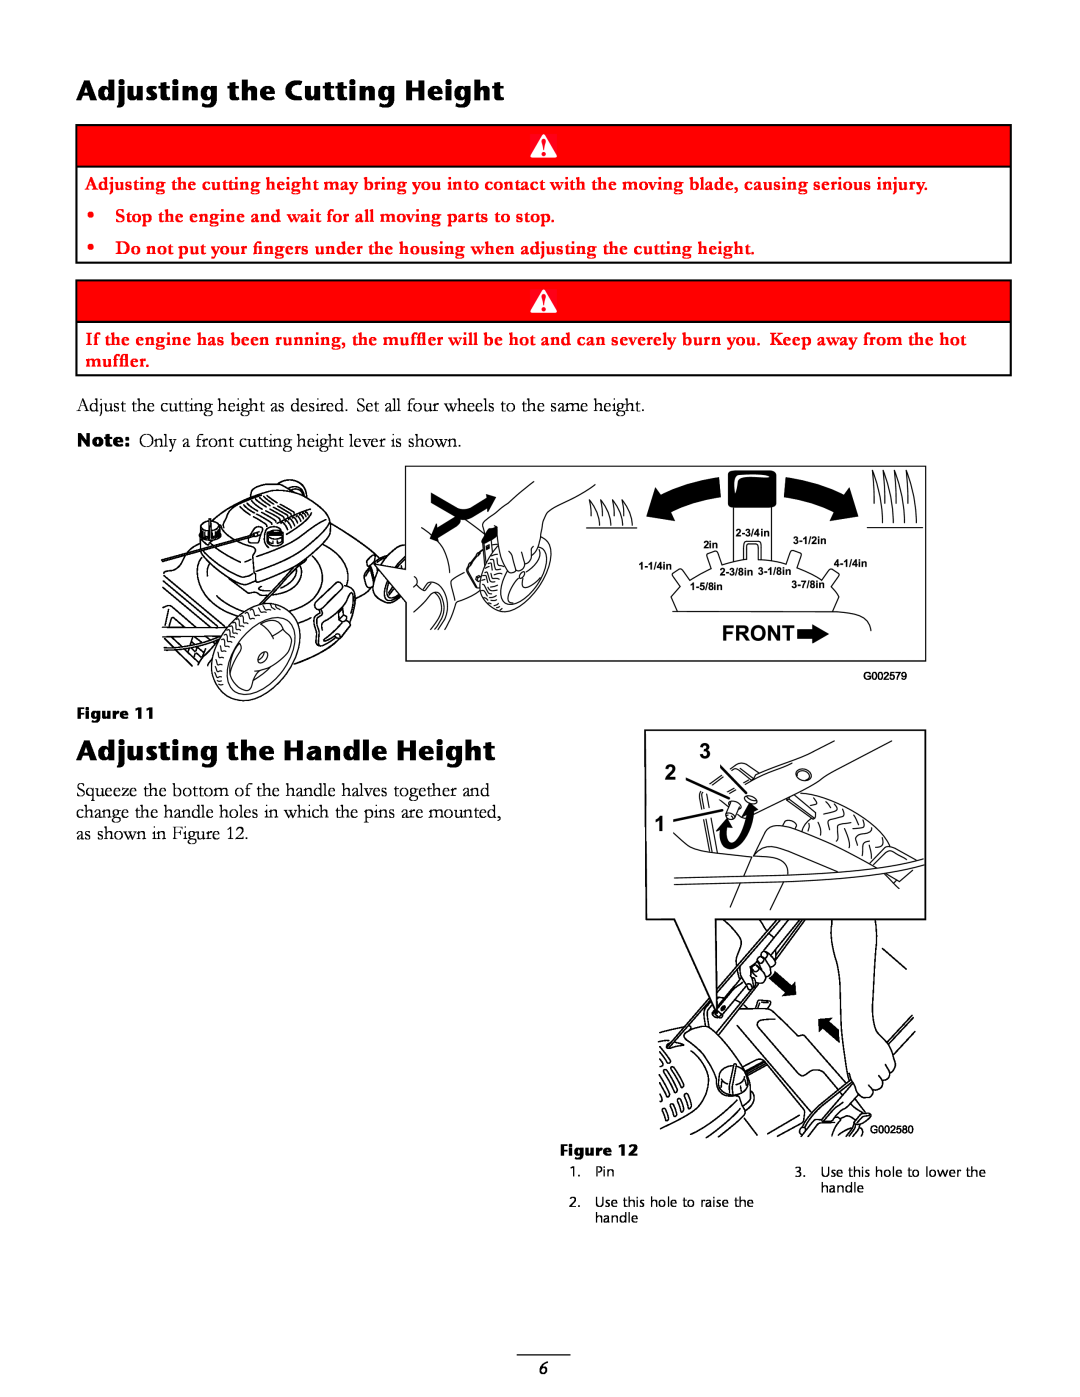 Toro 20016 owner manual Adjusting the Cutting Height, Adjusting the Handle Height 